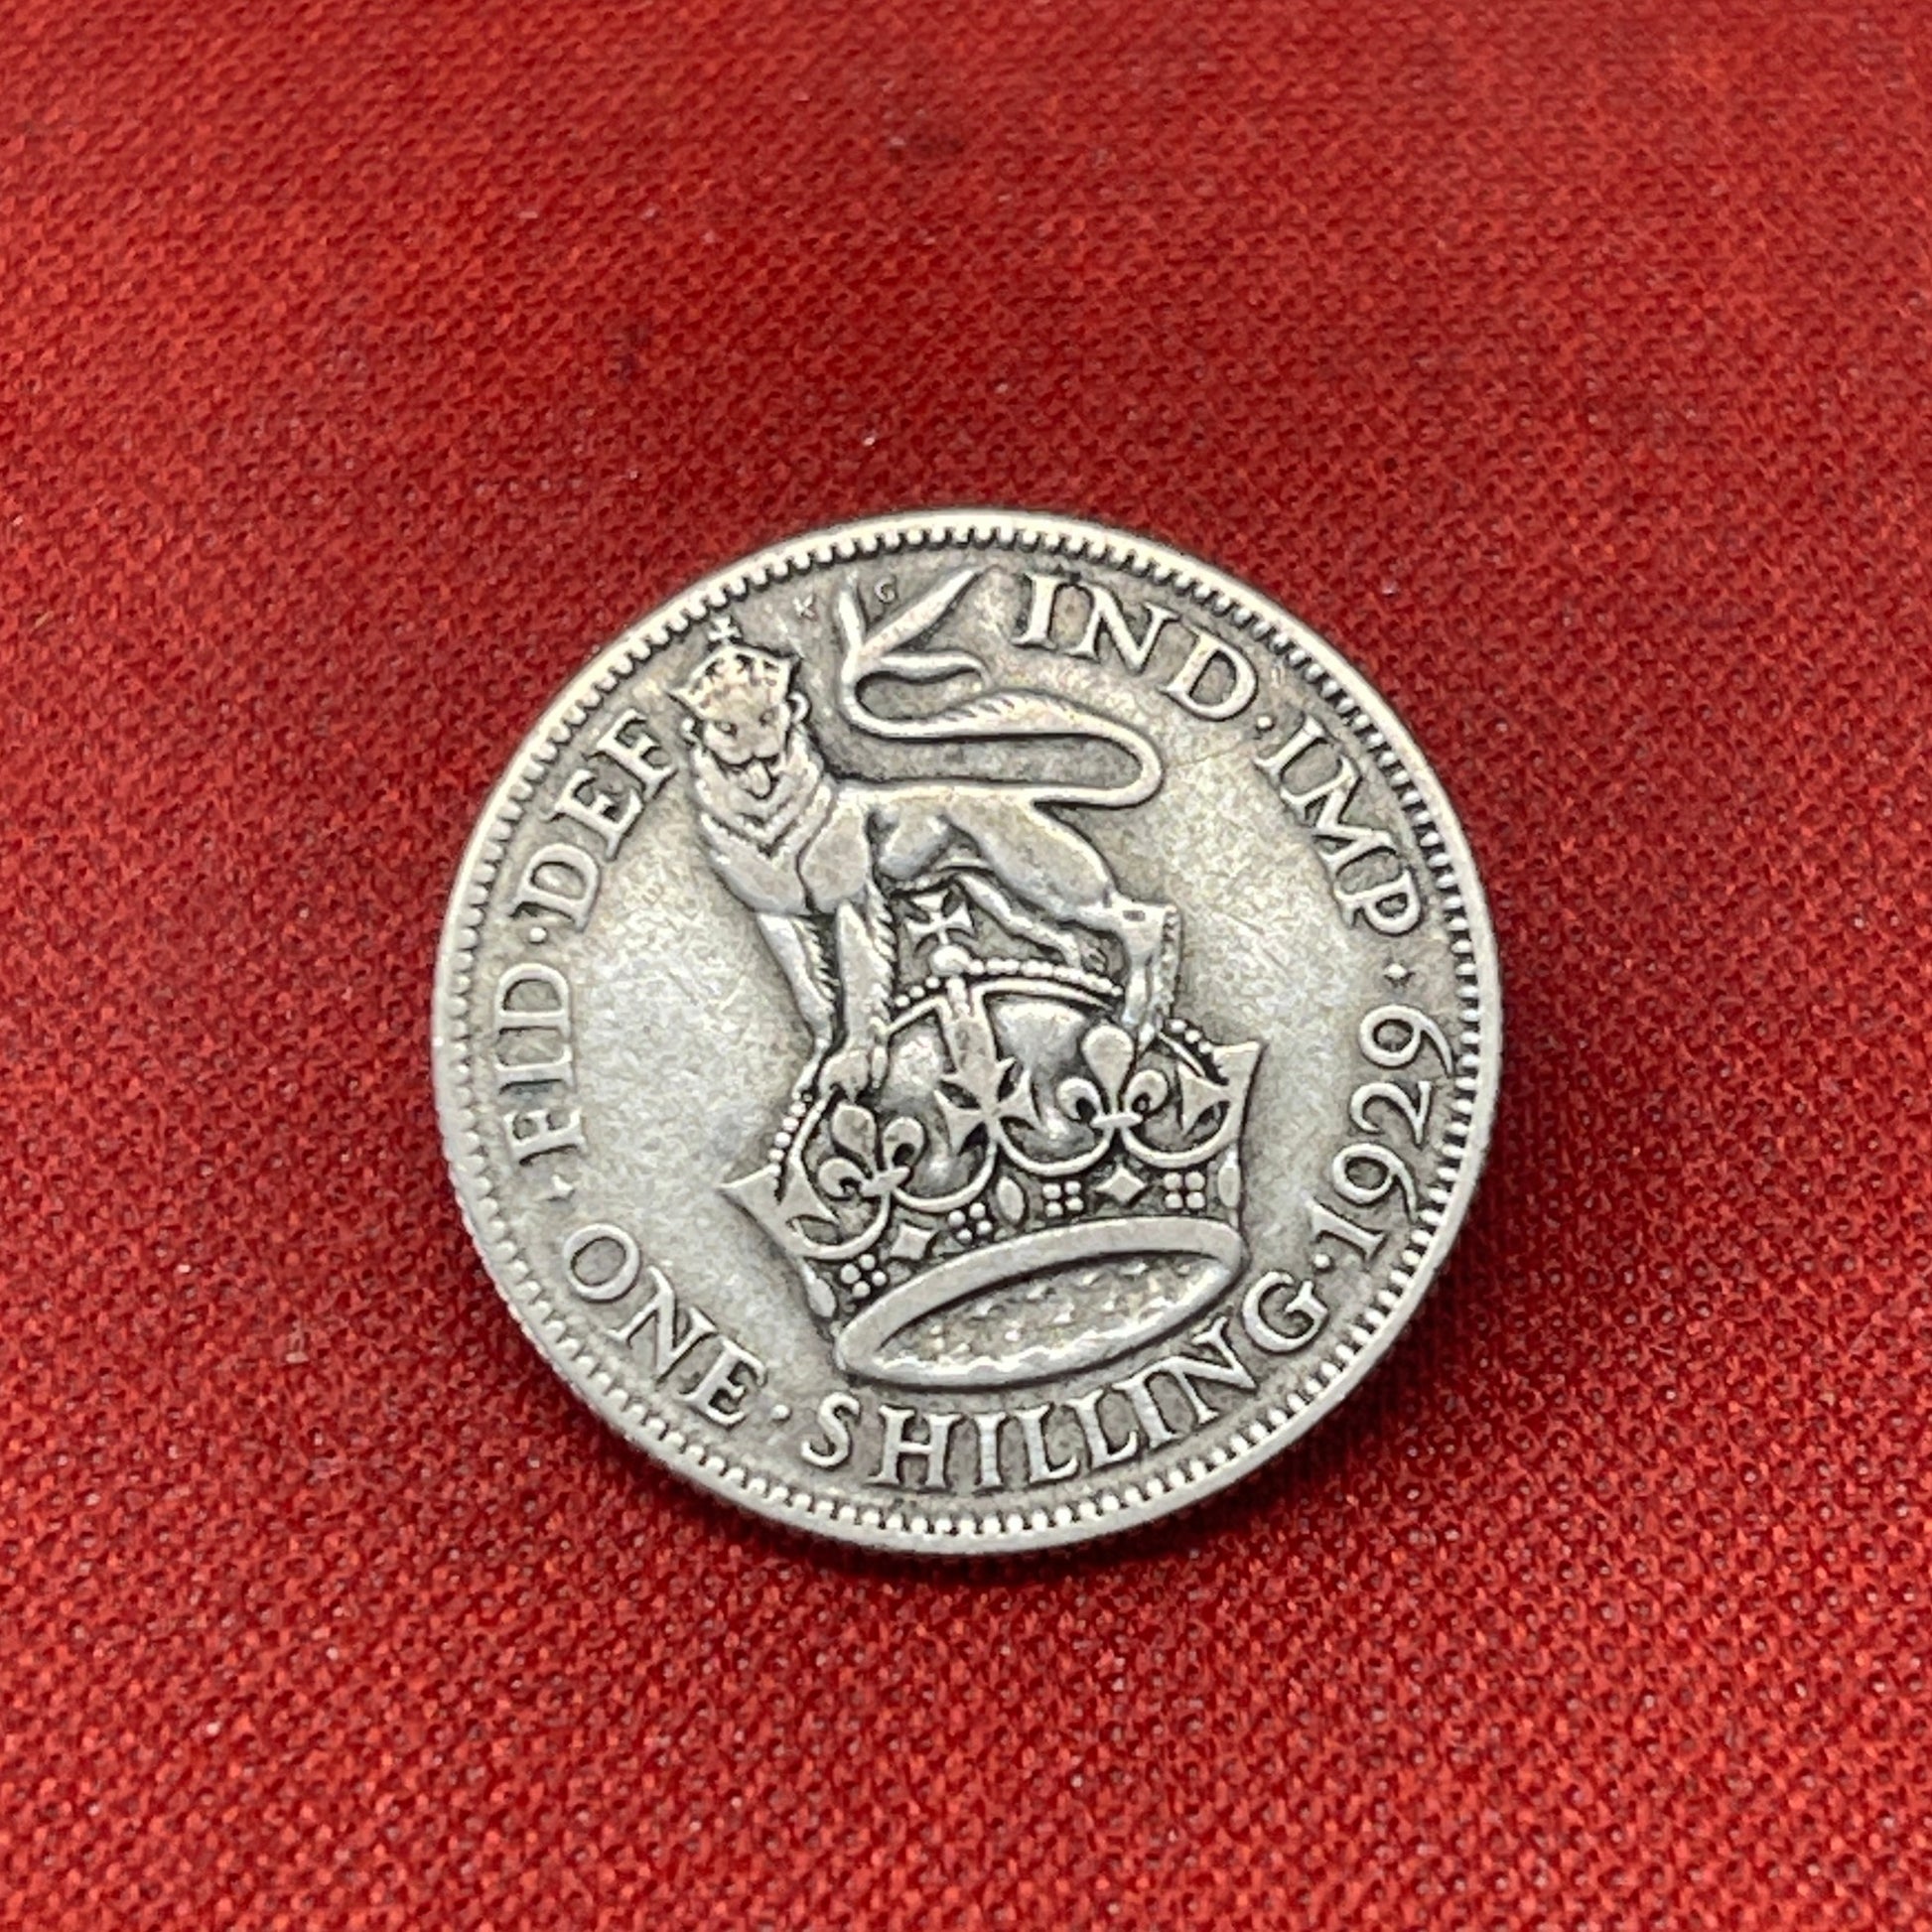 1929 King George V One Shilling Coin